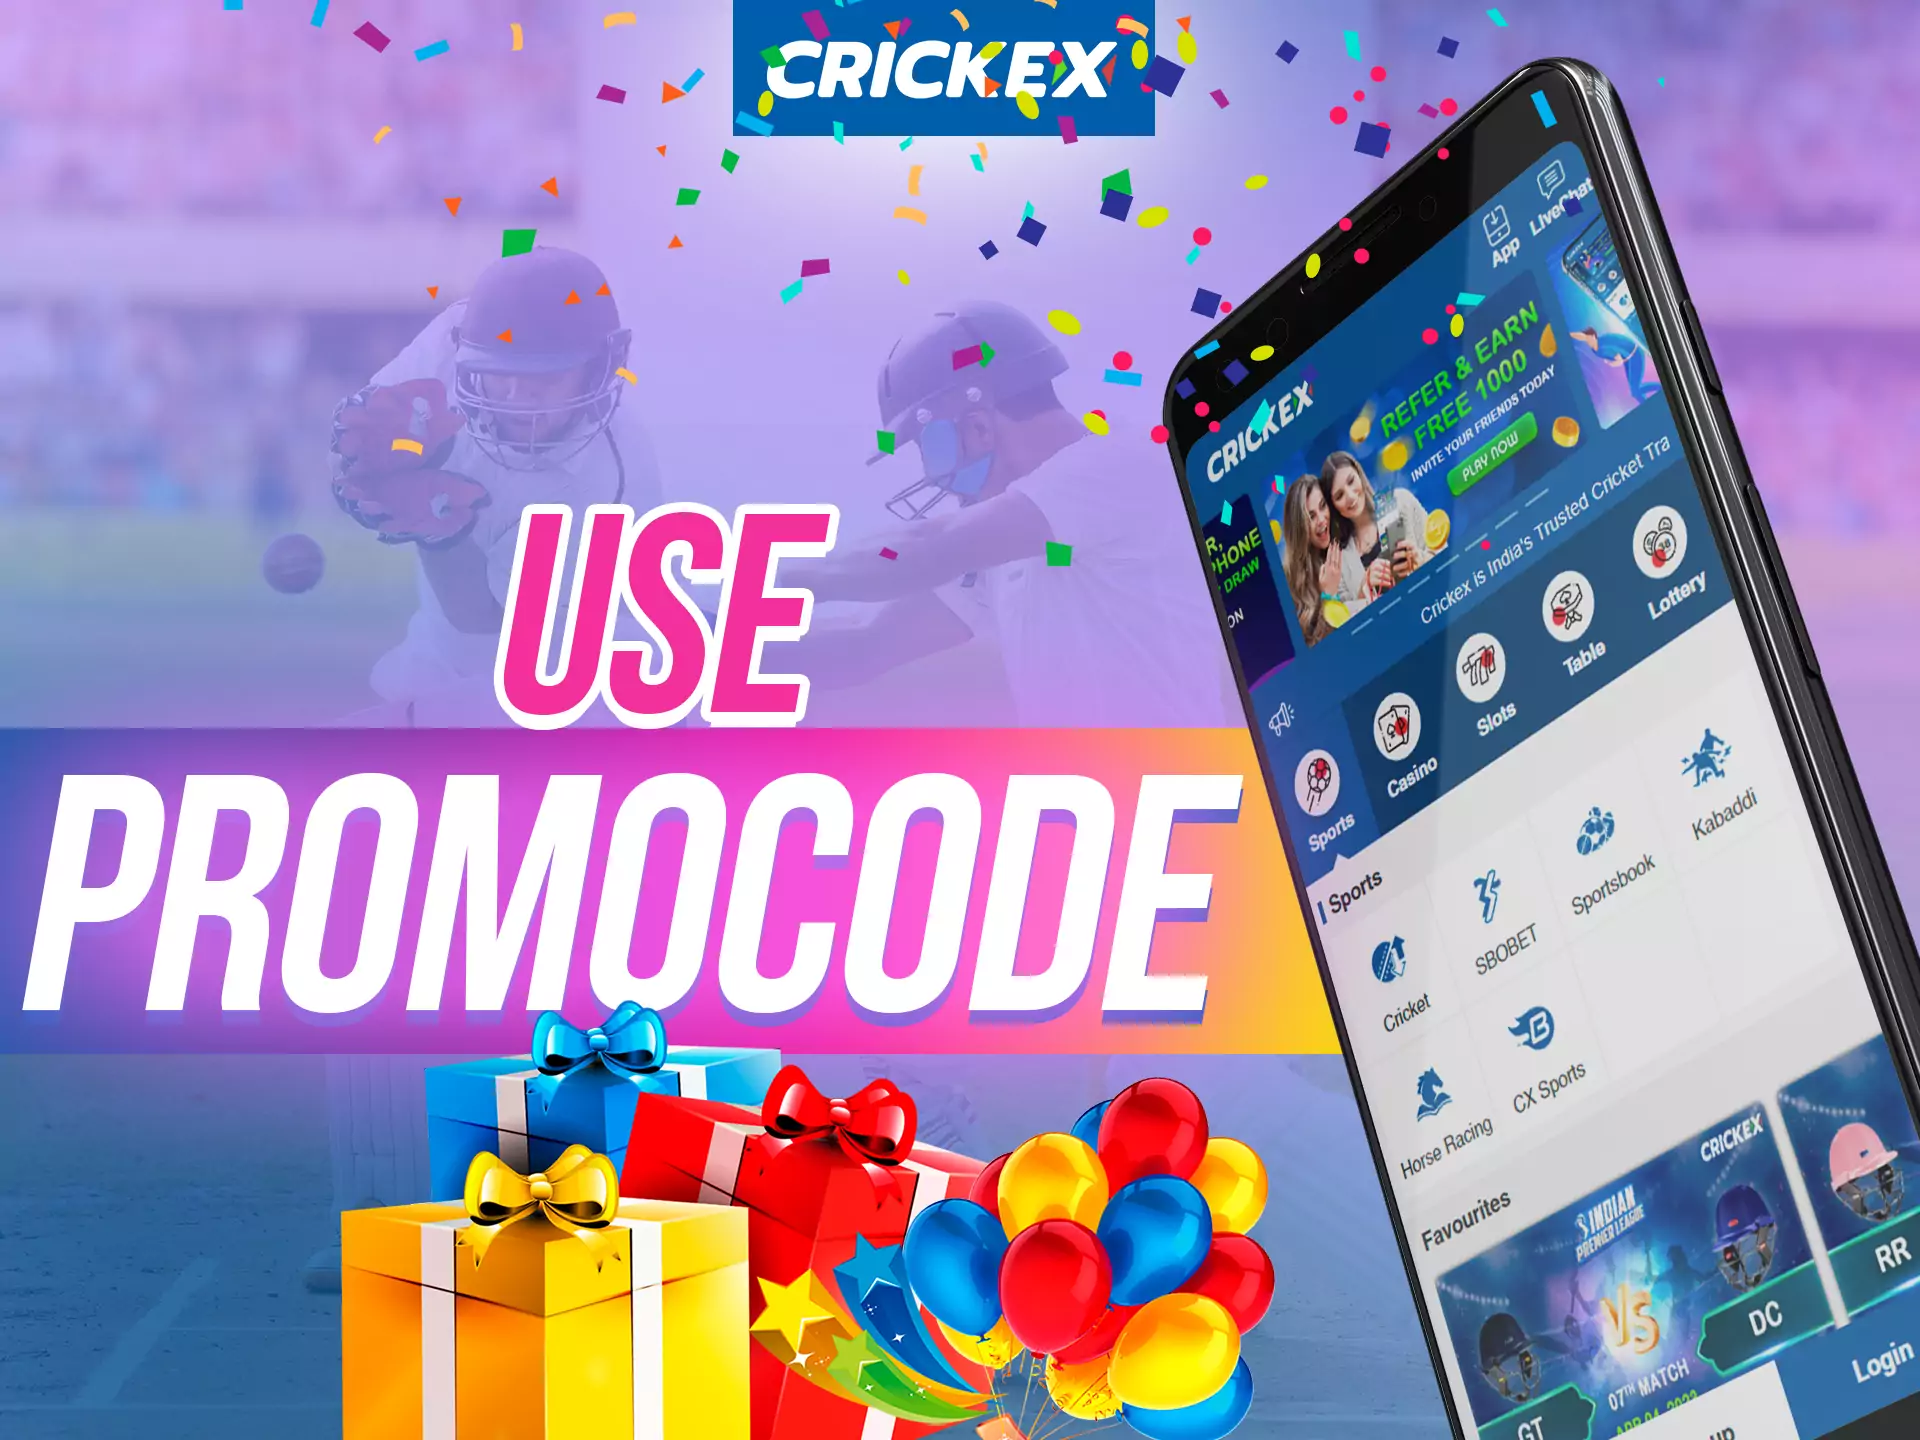 Use a special promo code for the Crickex app.